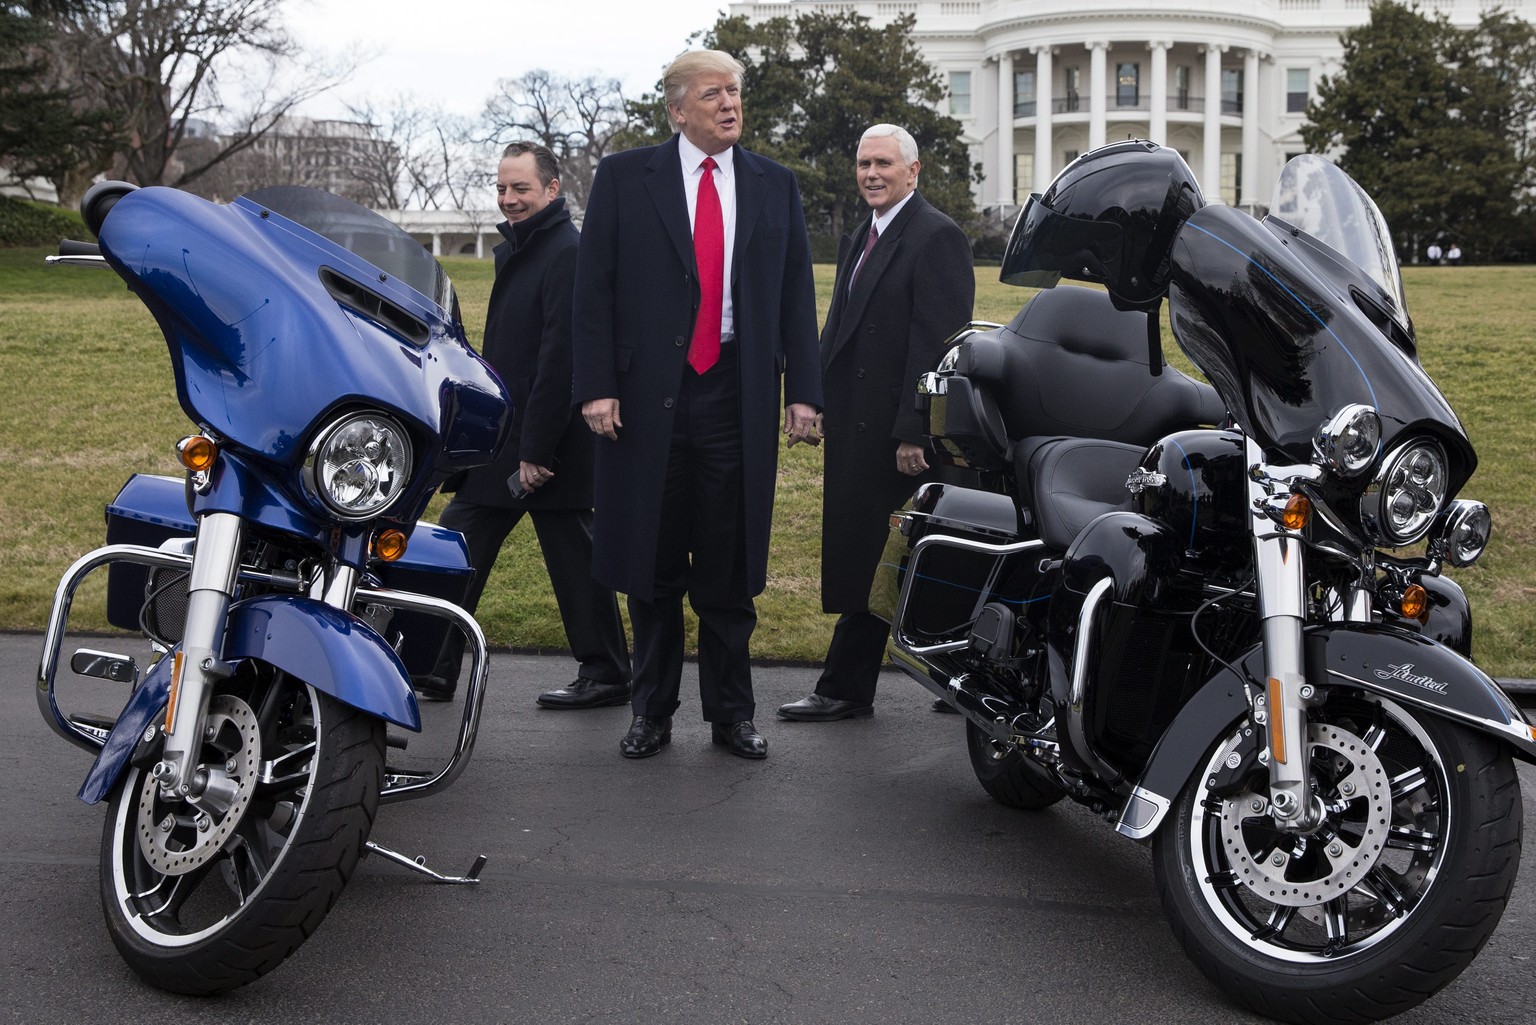 epa05767240 US President Donald J. Trump (C), US Vice President Mike Pence (R) and White House Chief of Staff Reince Priebus (L) look at Harley Davidson motorcycles while greeting Harley Davidson exec ...